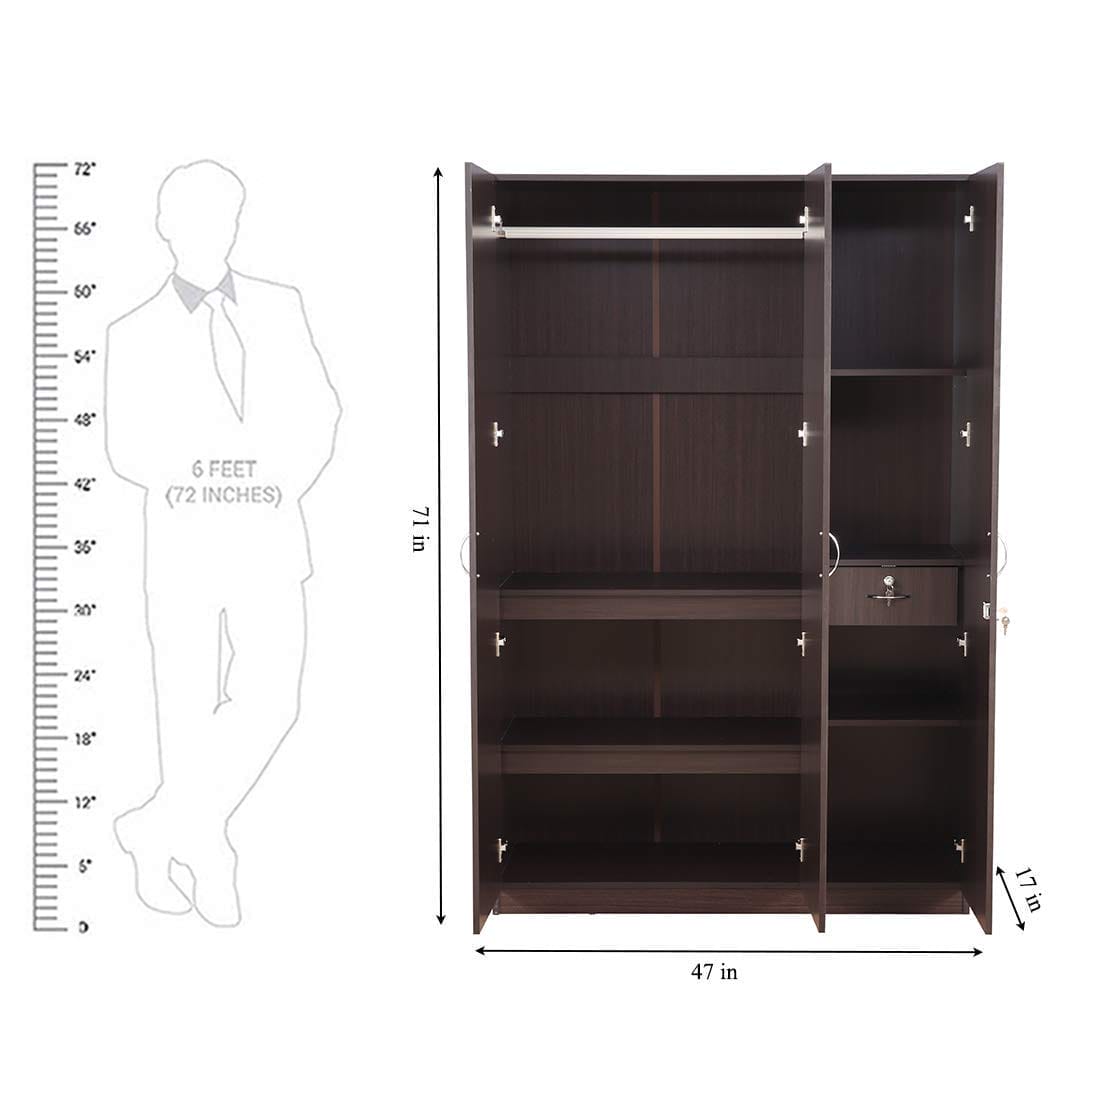 Walnut Colour 3 Door Wardrobe with Mirror,Drawer, Shelves and Hanging Space for Clothes | Wardrobe for Clothes | Cupboard | Almirah